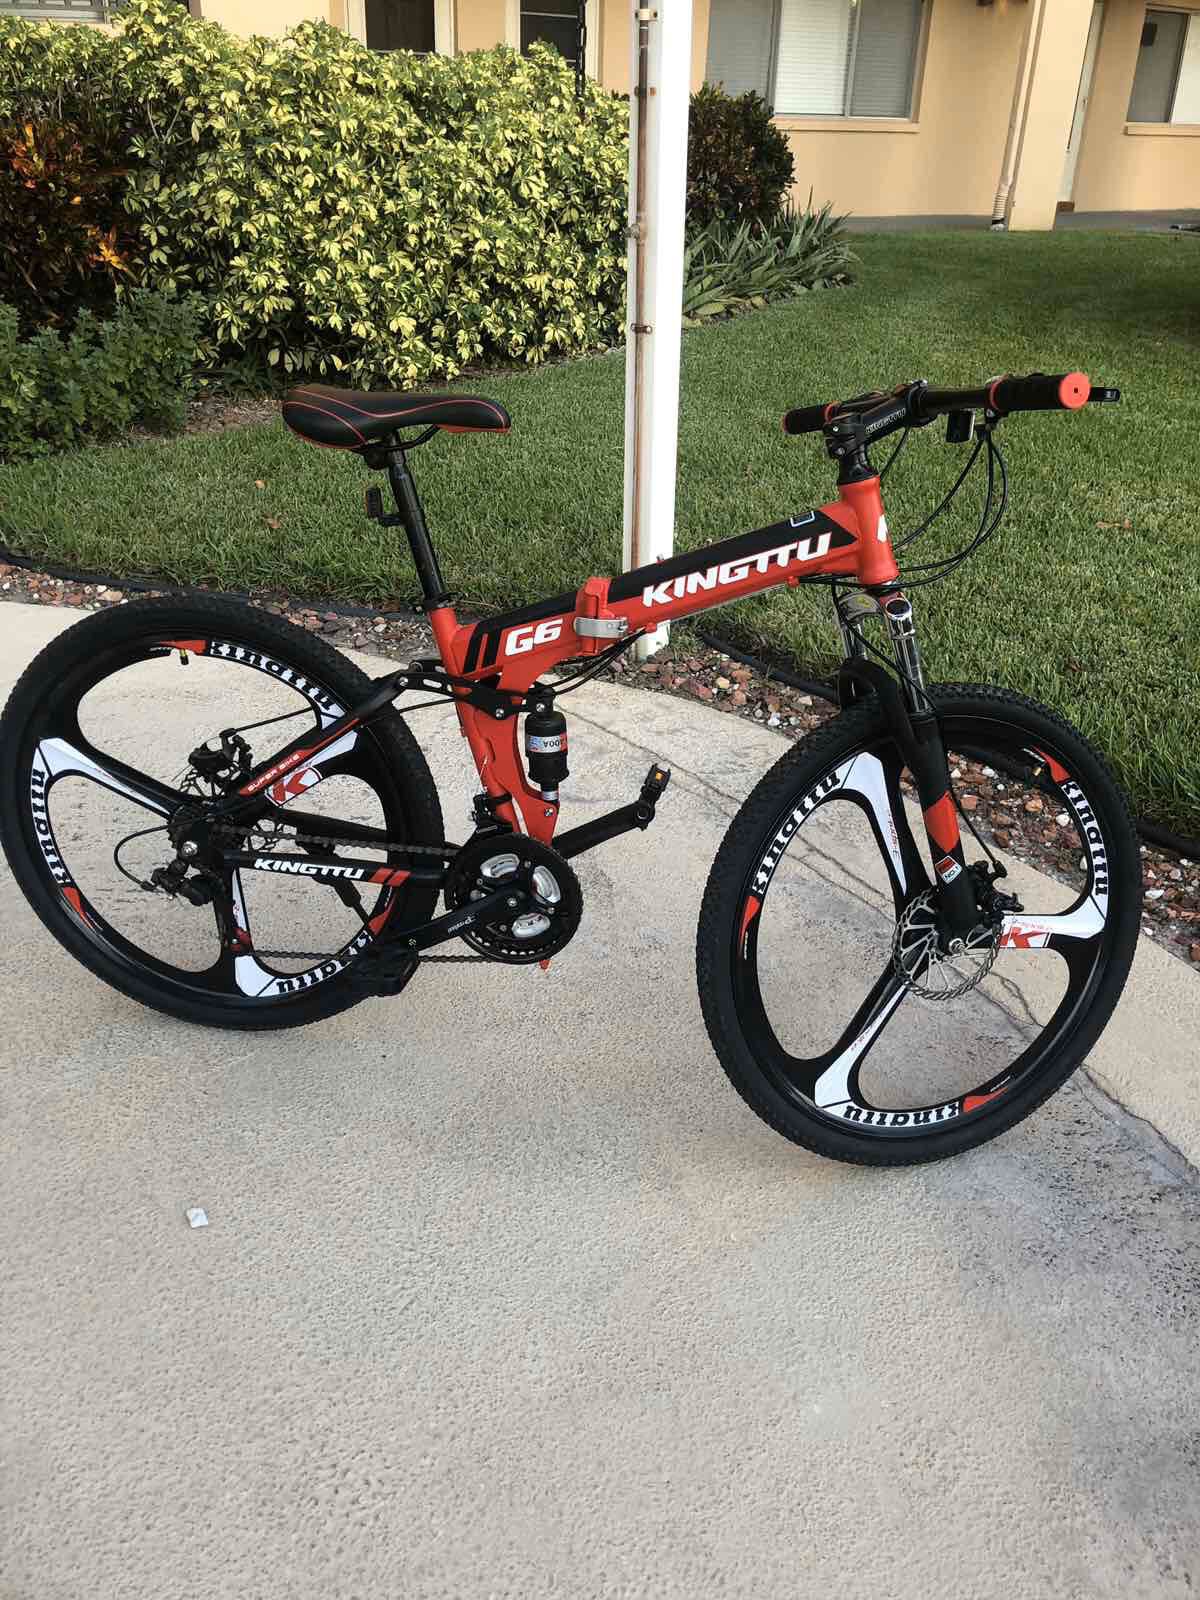 Mounting folding bike for sale brand new only used once